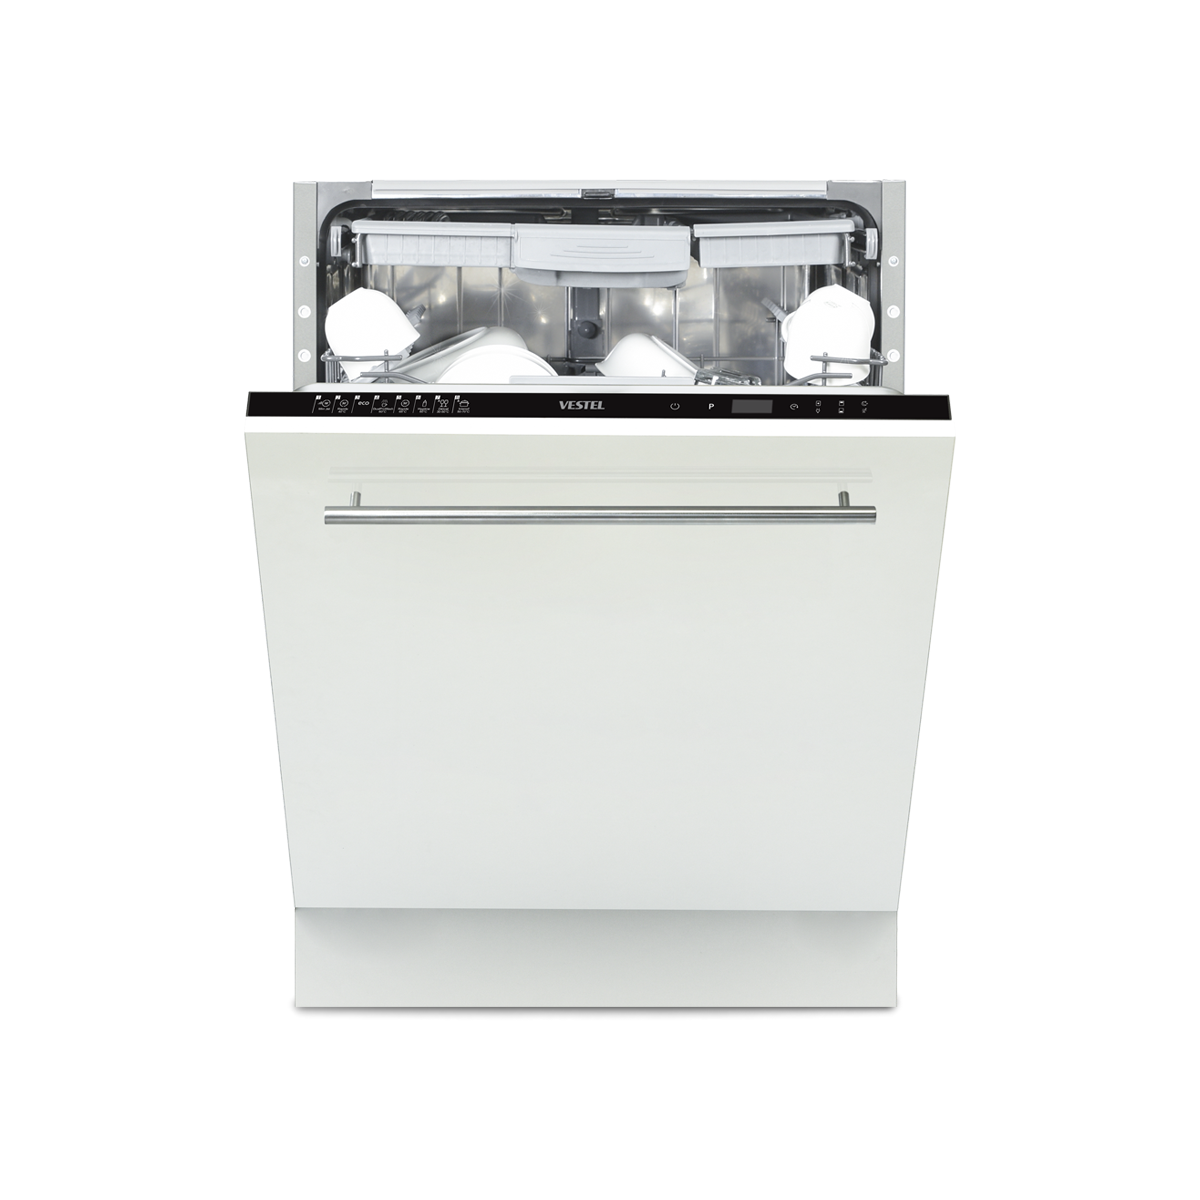 Dish Washer DF 585 B (built-in)